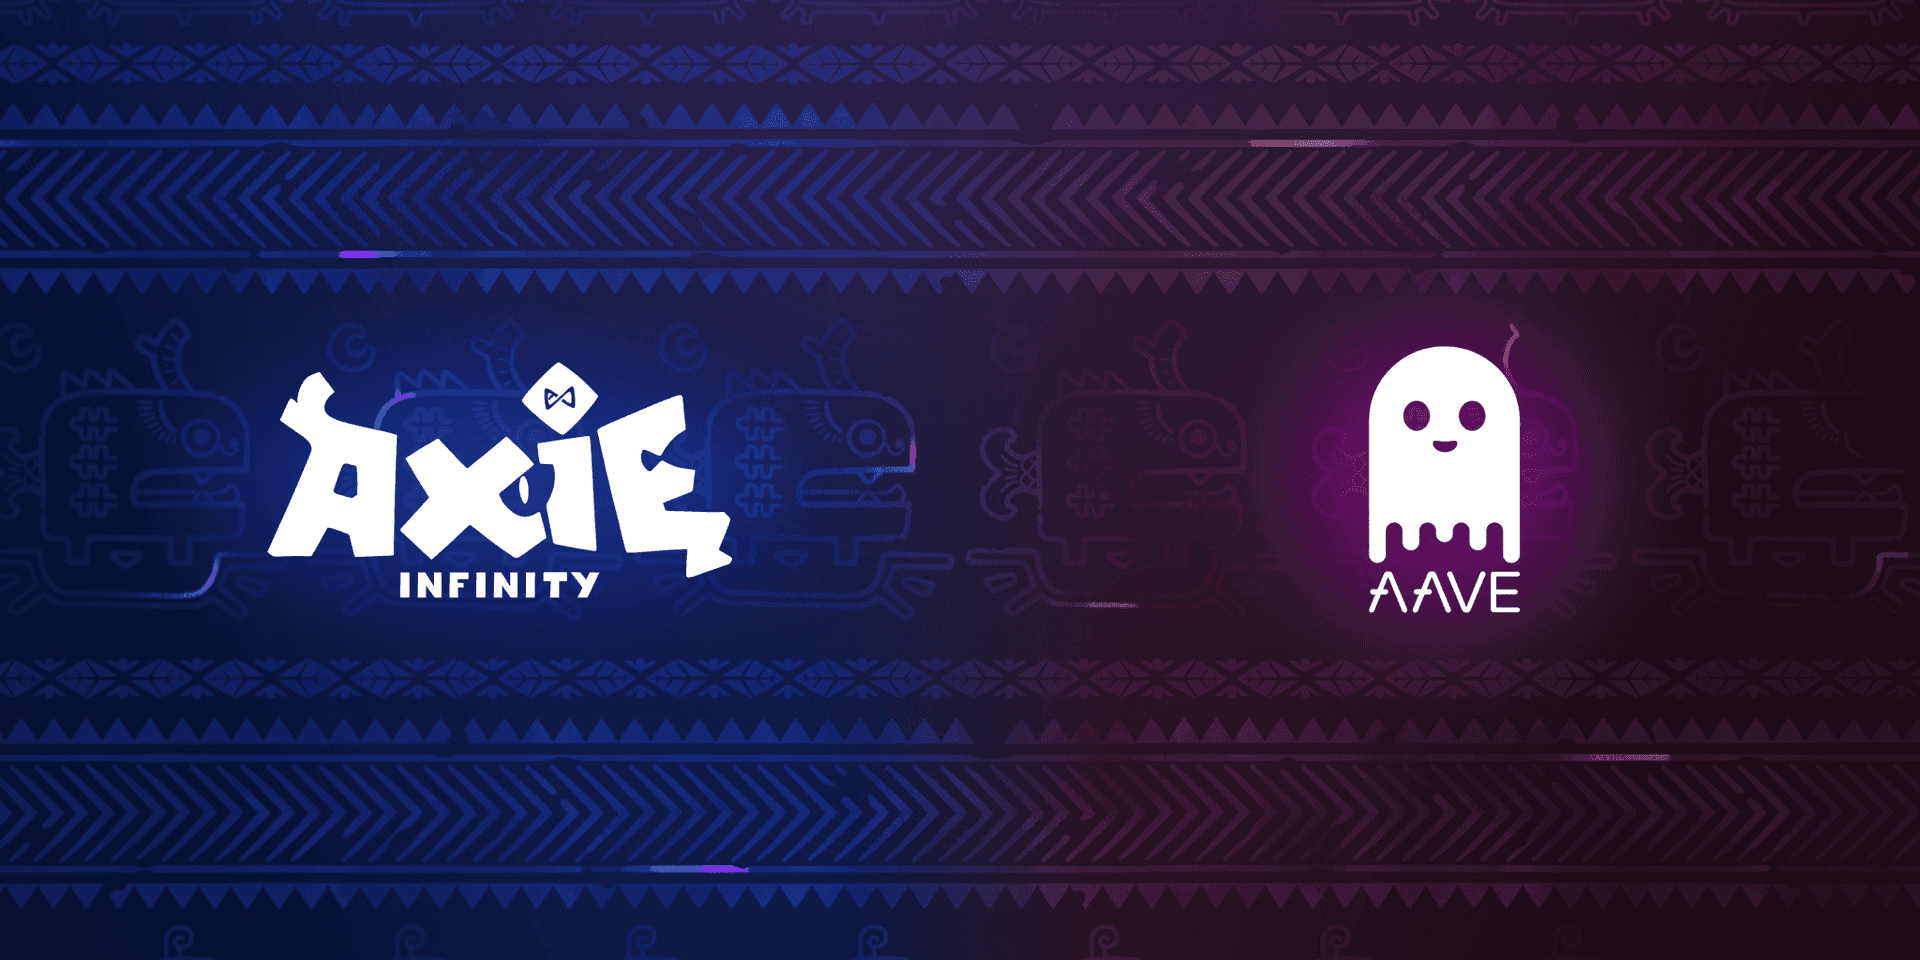 Axe And Hive Logos On A Dark Background